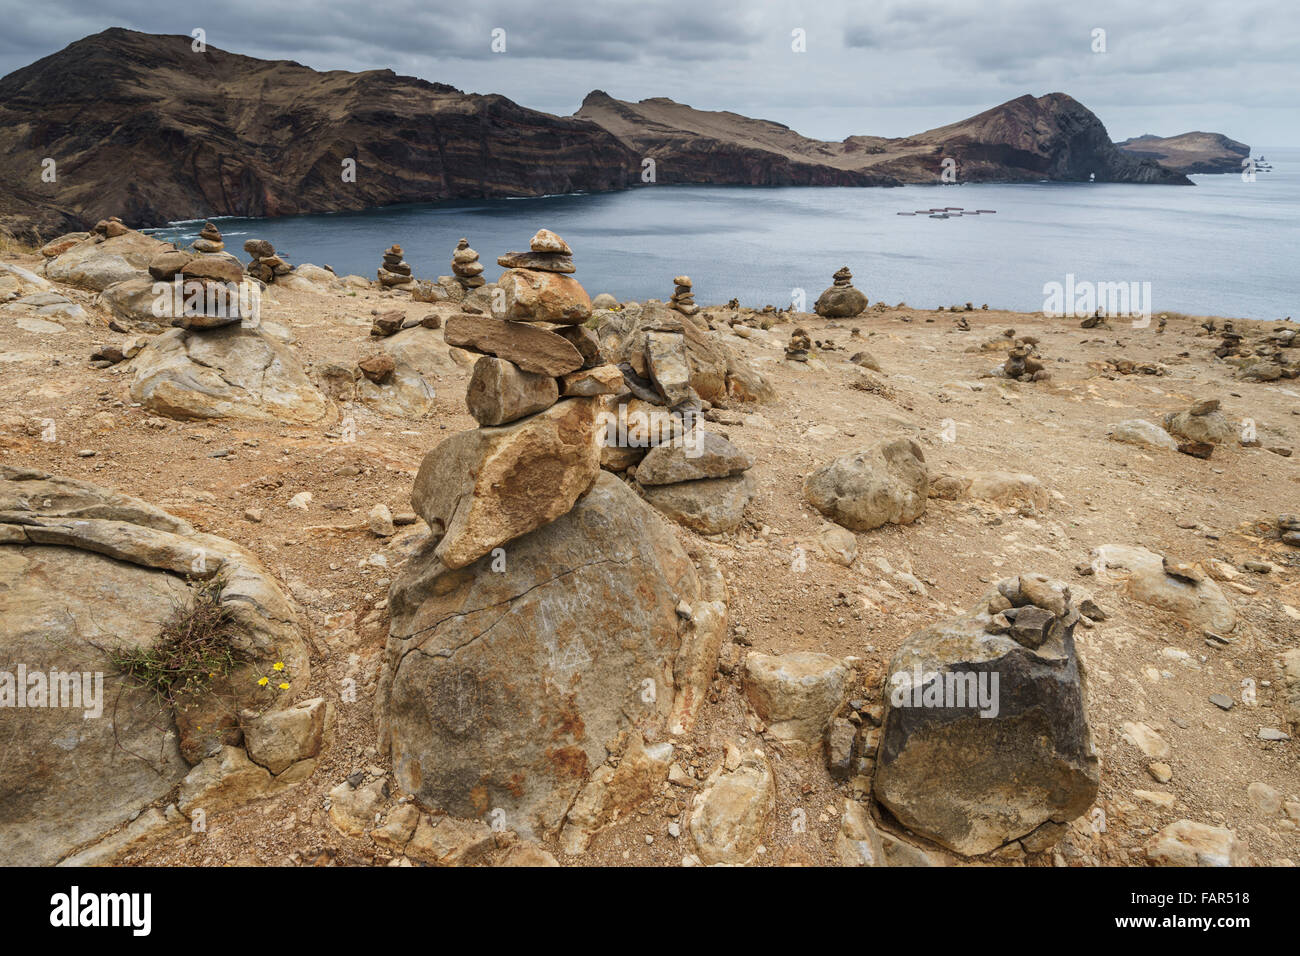 Madeira - Ponta do Buraco. Erratic stones on the bare landscape are piled into balanced towers by visitors. Stock Photo